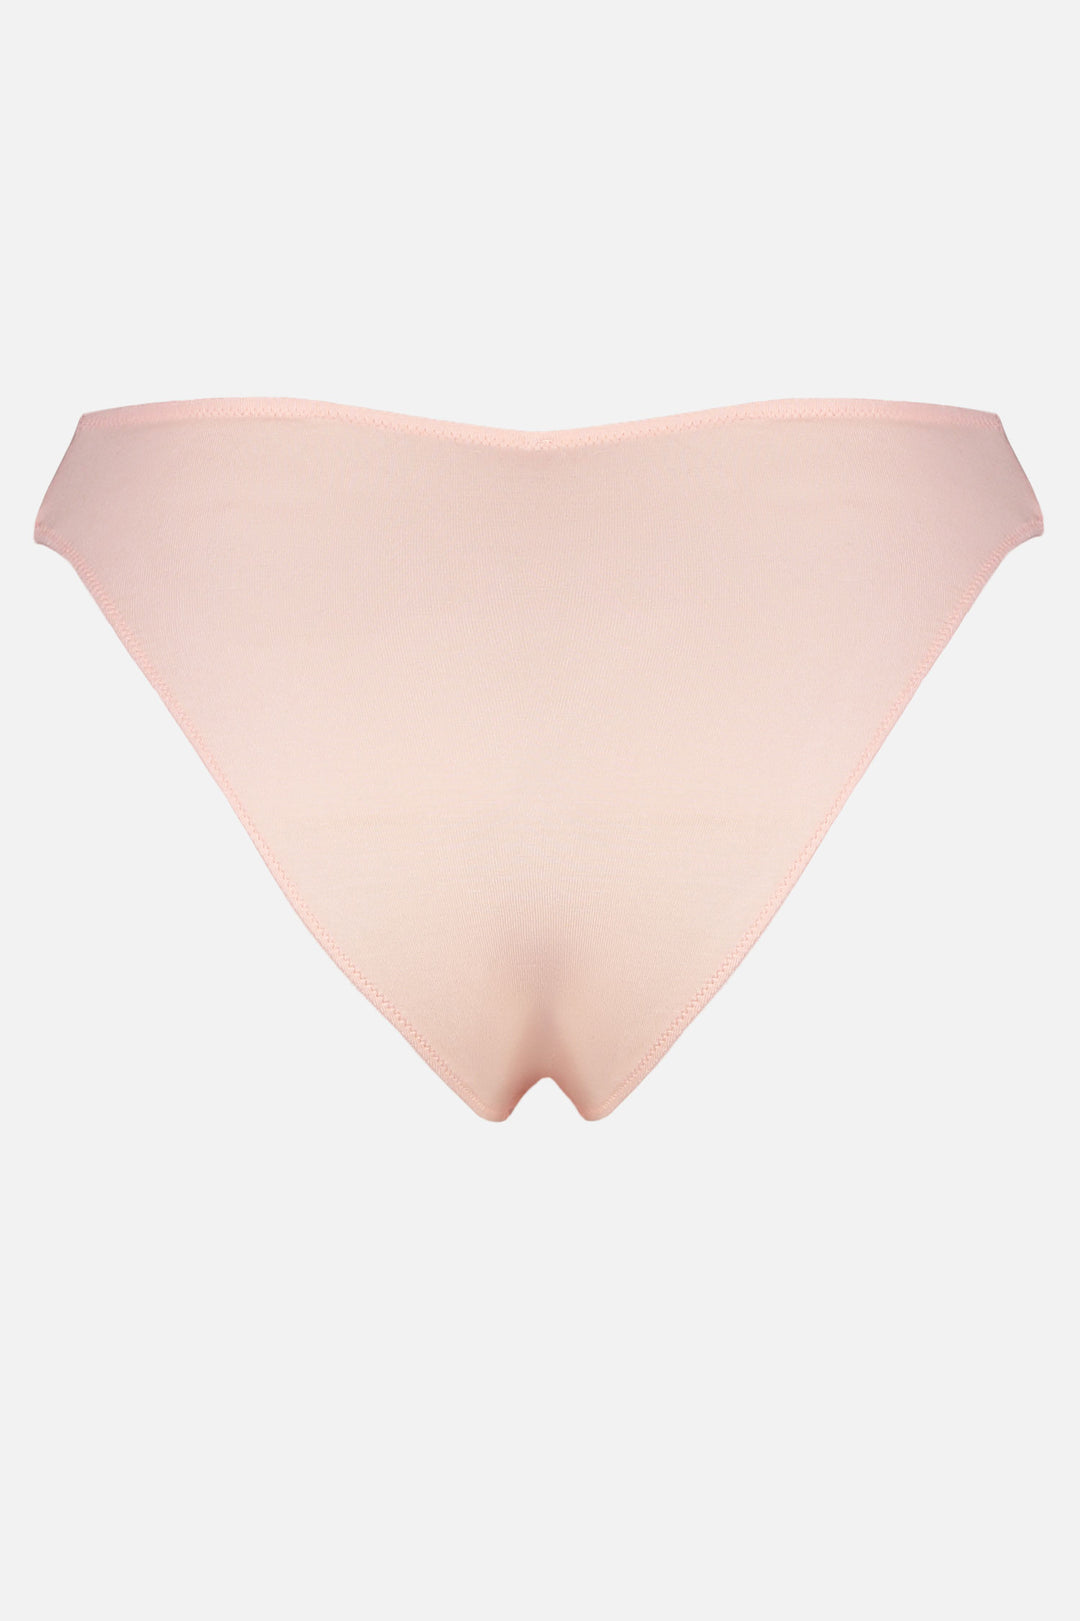 Videris Lingerie bikini knicker in blush pink TENCEL™  mid-rise style with cheeky bottom coverage and soft elastics